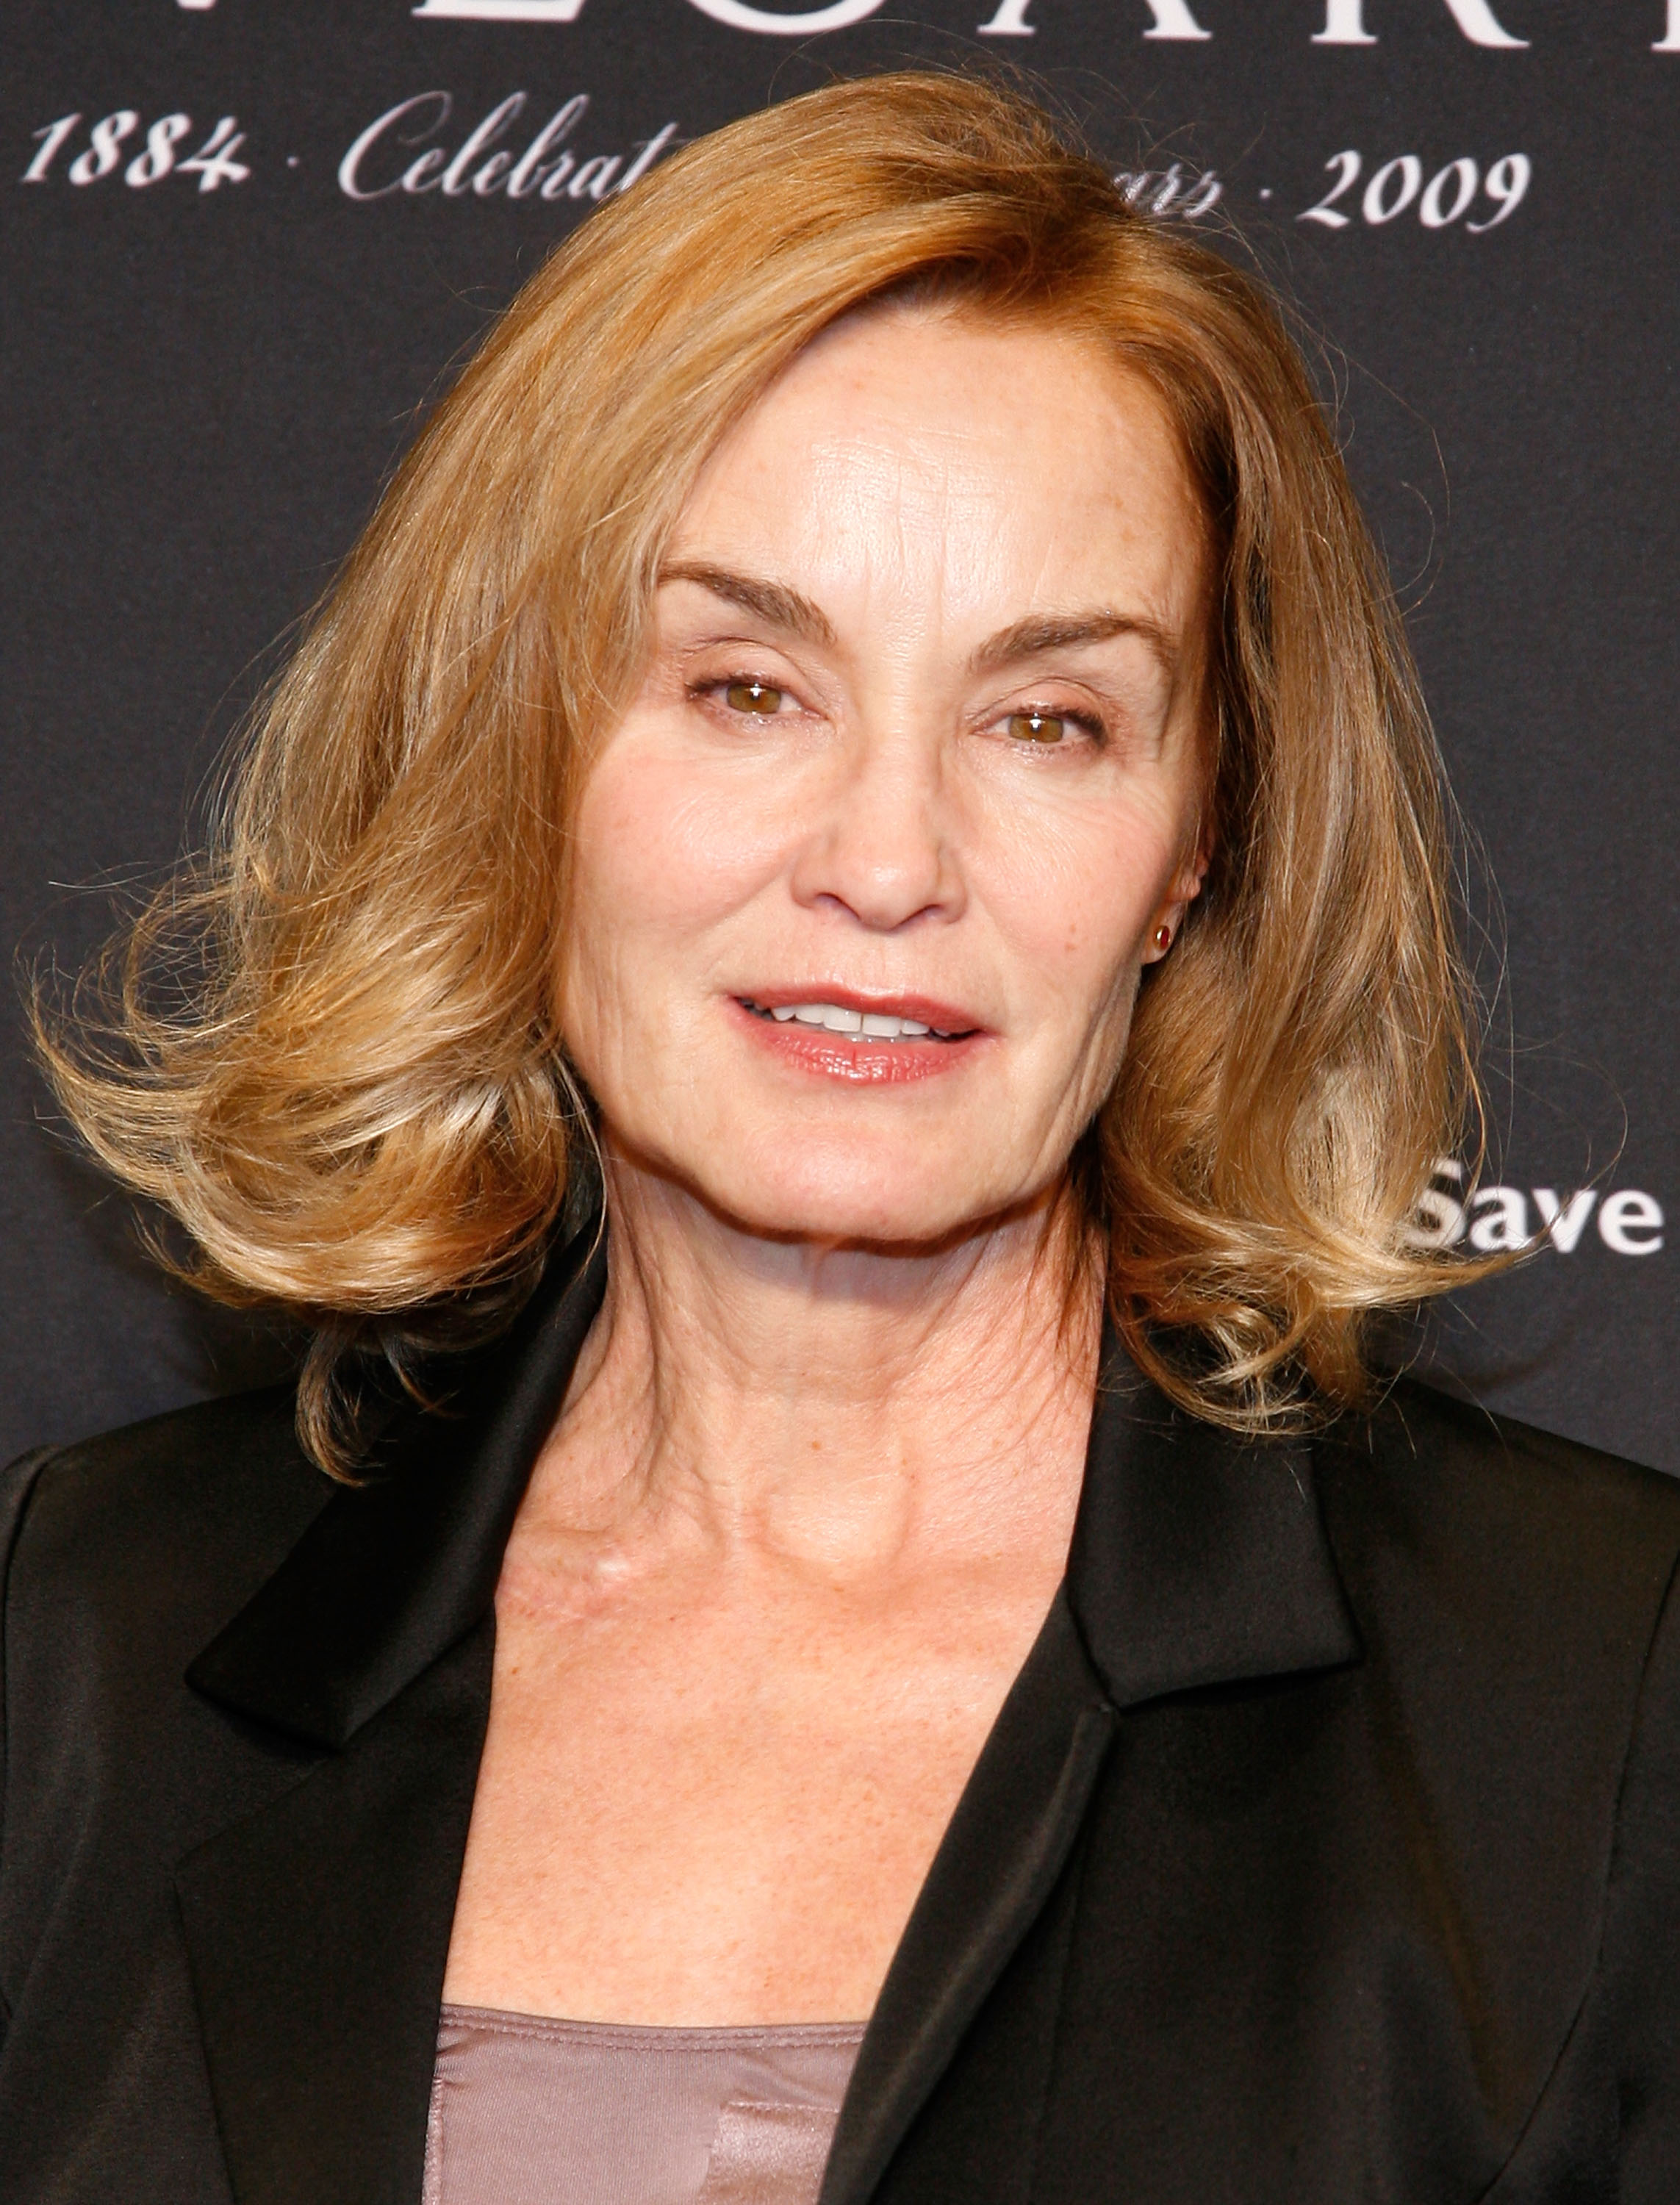 Jessica Lange attends the Bulgari auction to benefit Save the Children's "Rewrite the Future" at Christie's on December 8, 2009 in New York City. | Source: Getty Images